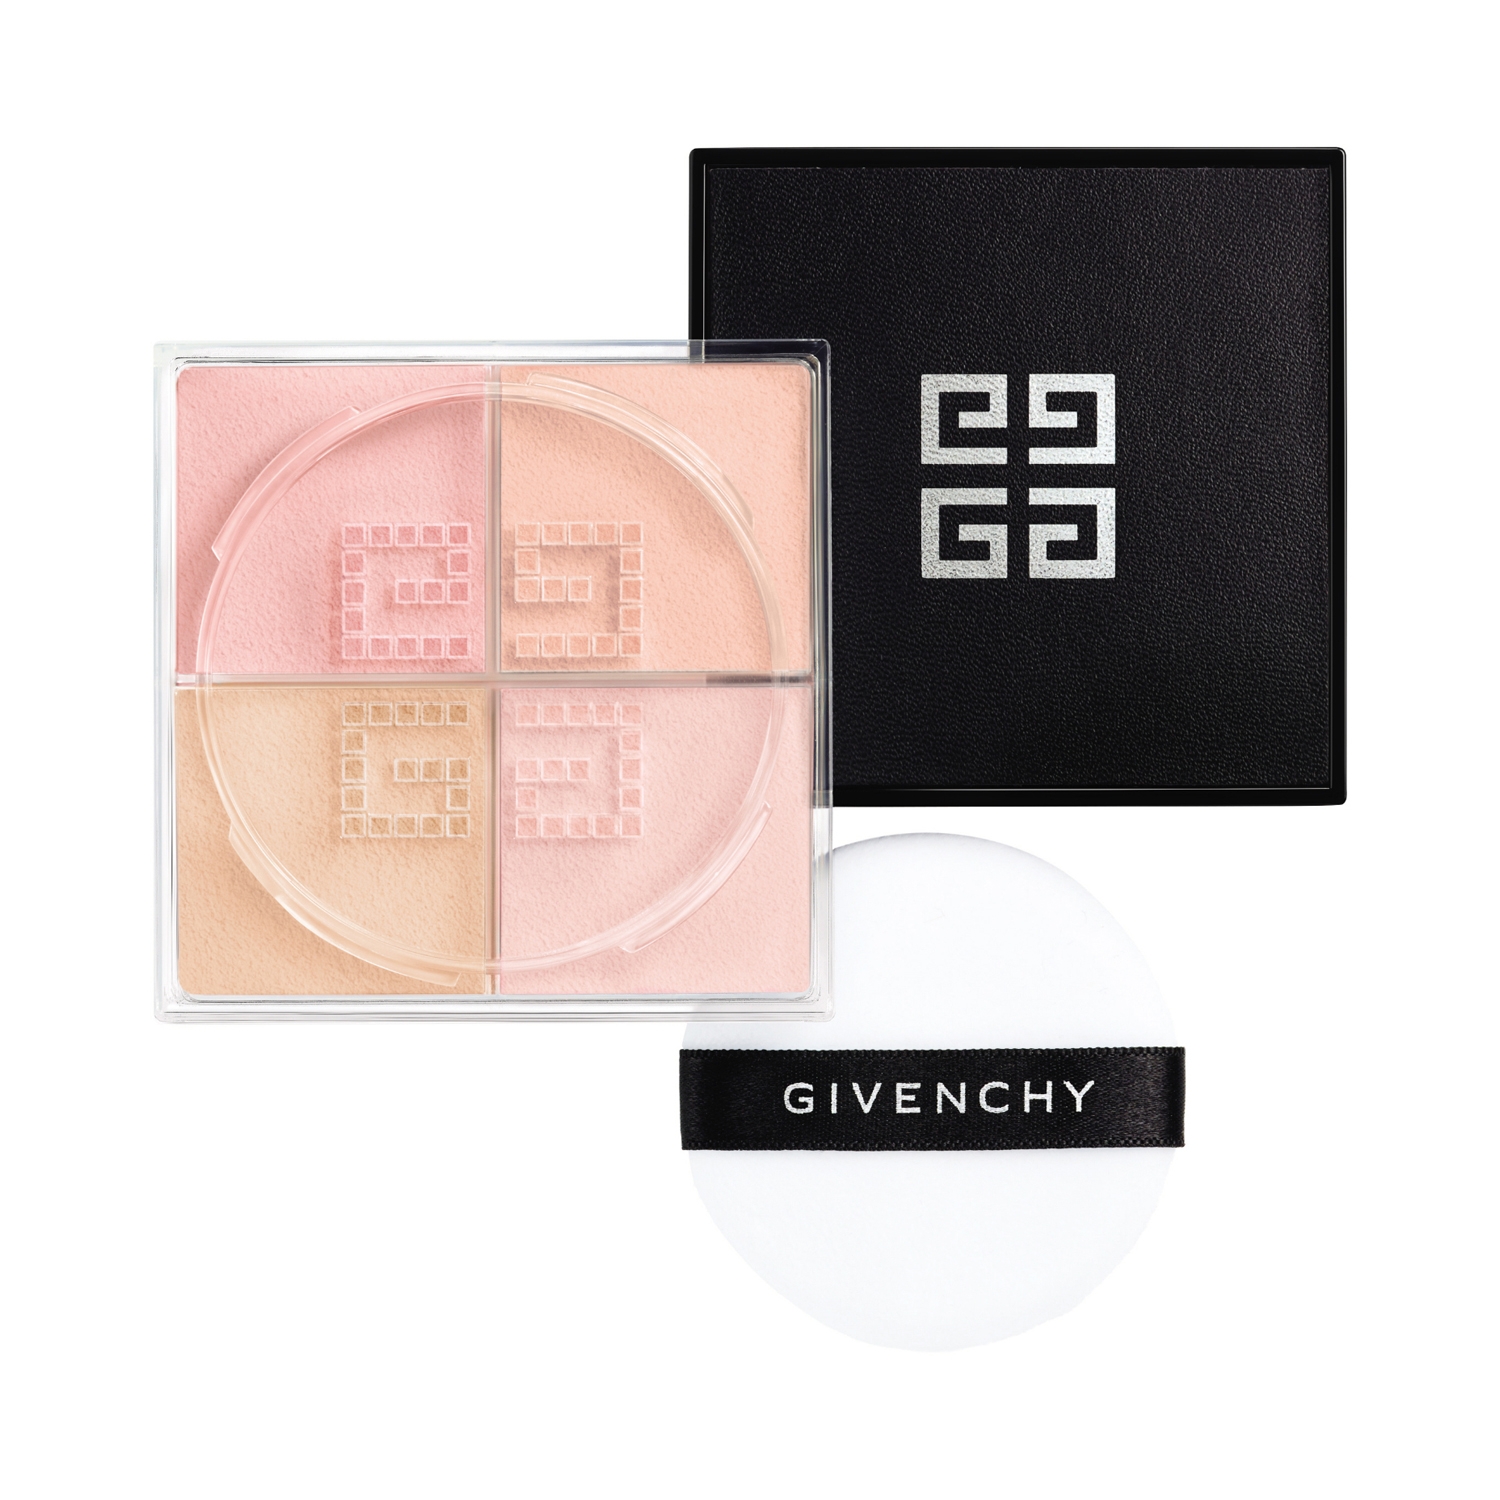 Givenchy | Givenchy Prisme Libre Setting & Finishing Loose Powder - N 03 Voile Rose (12g)